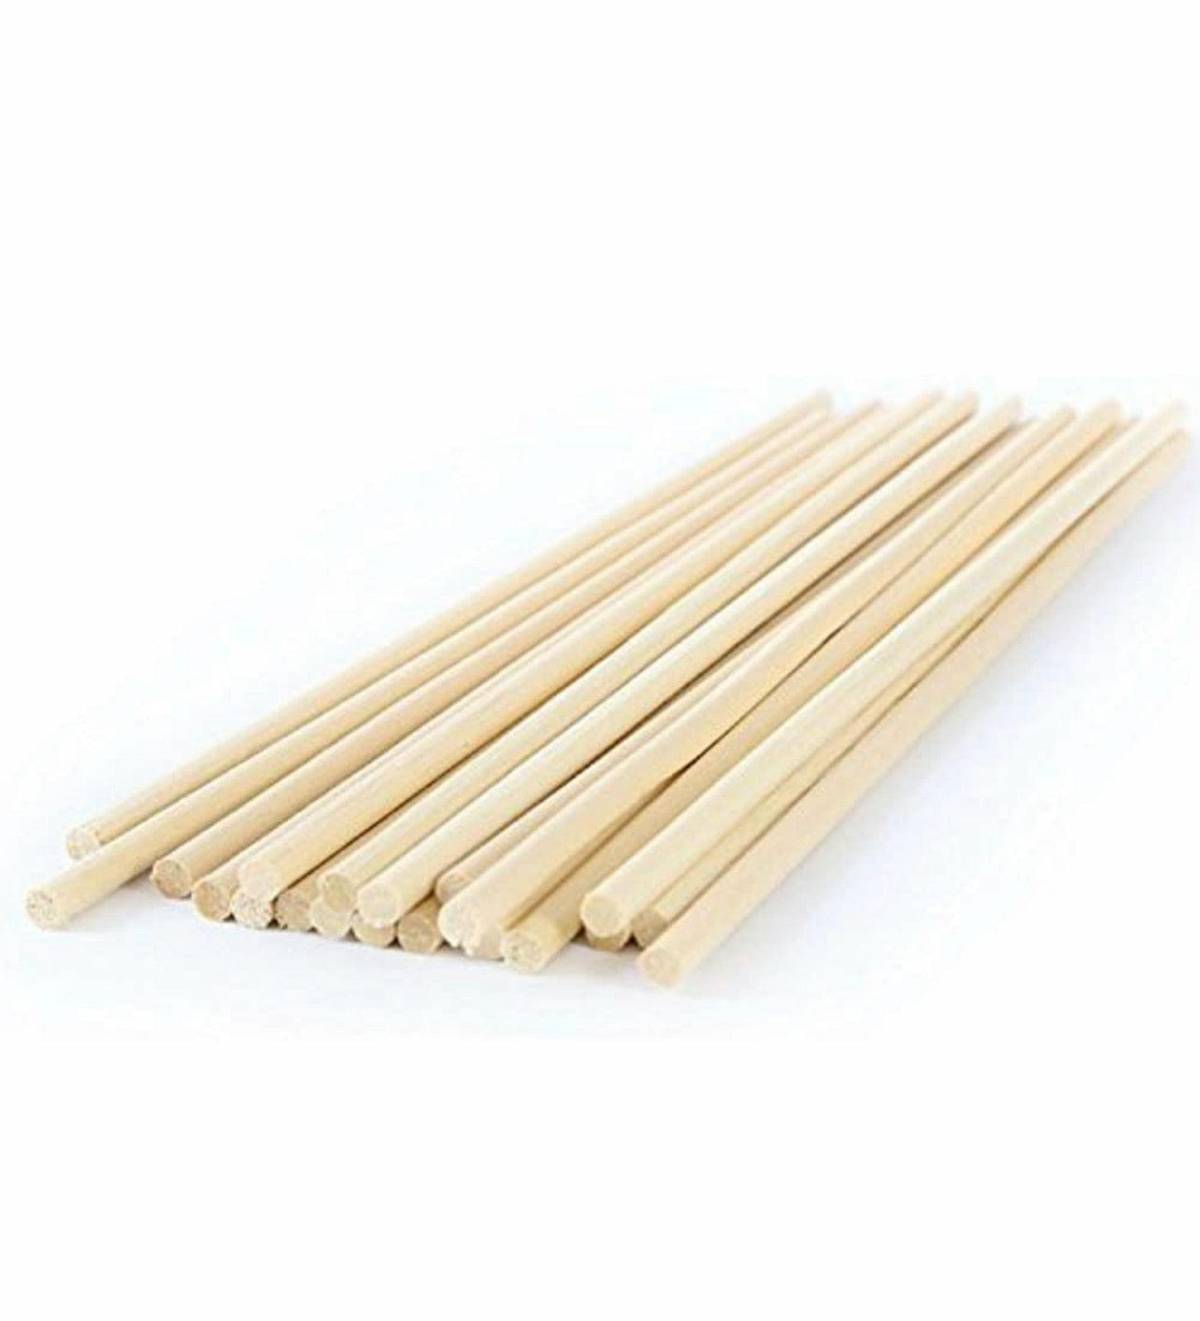 Wooden Dowel Stick 
Pack of 6
Size 12 Inch